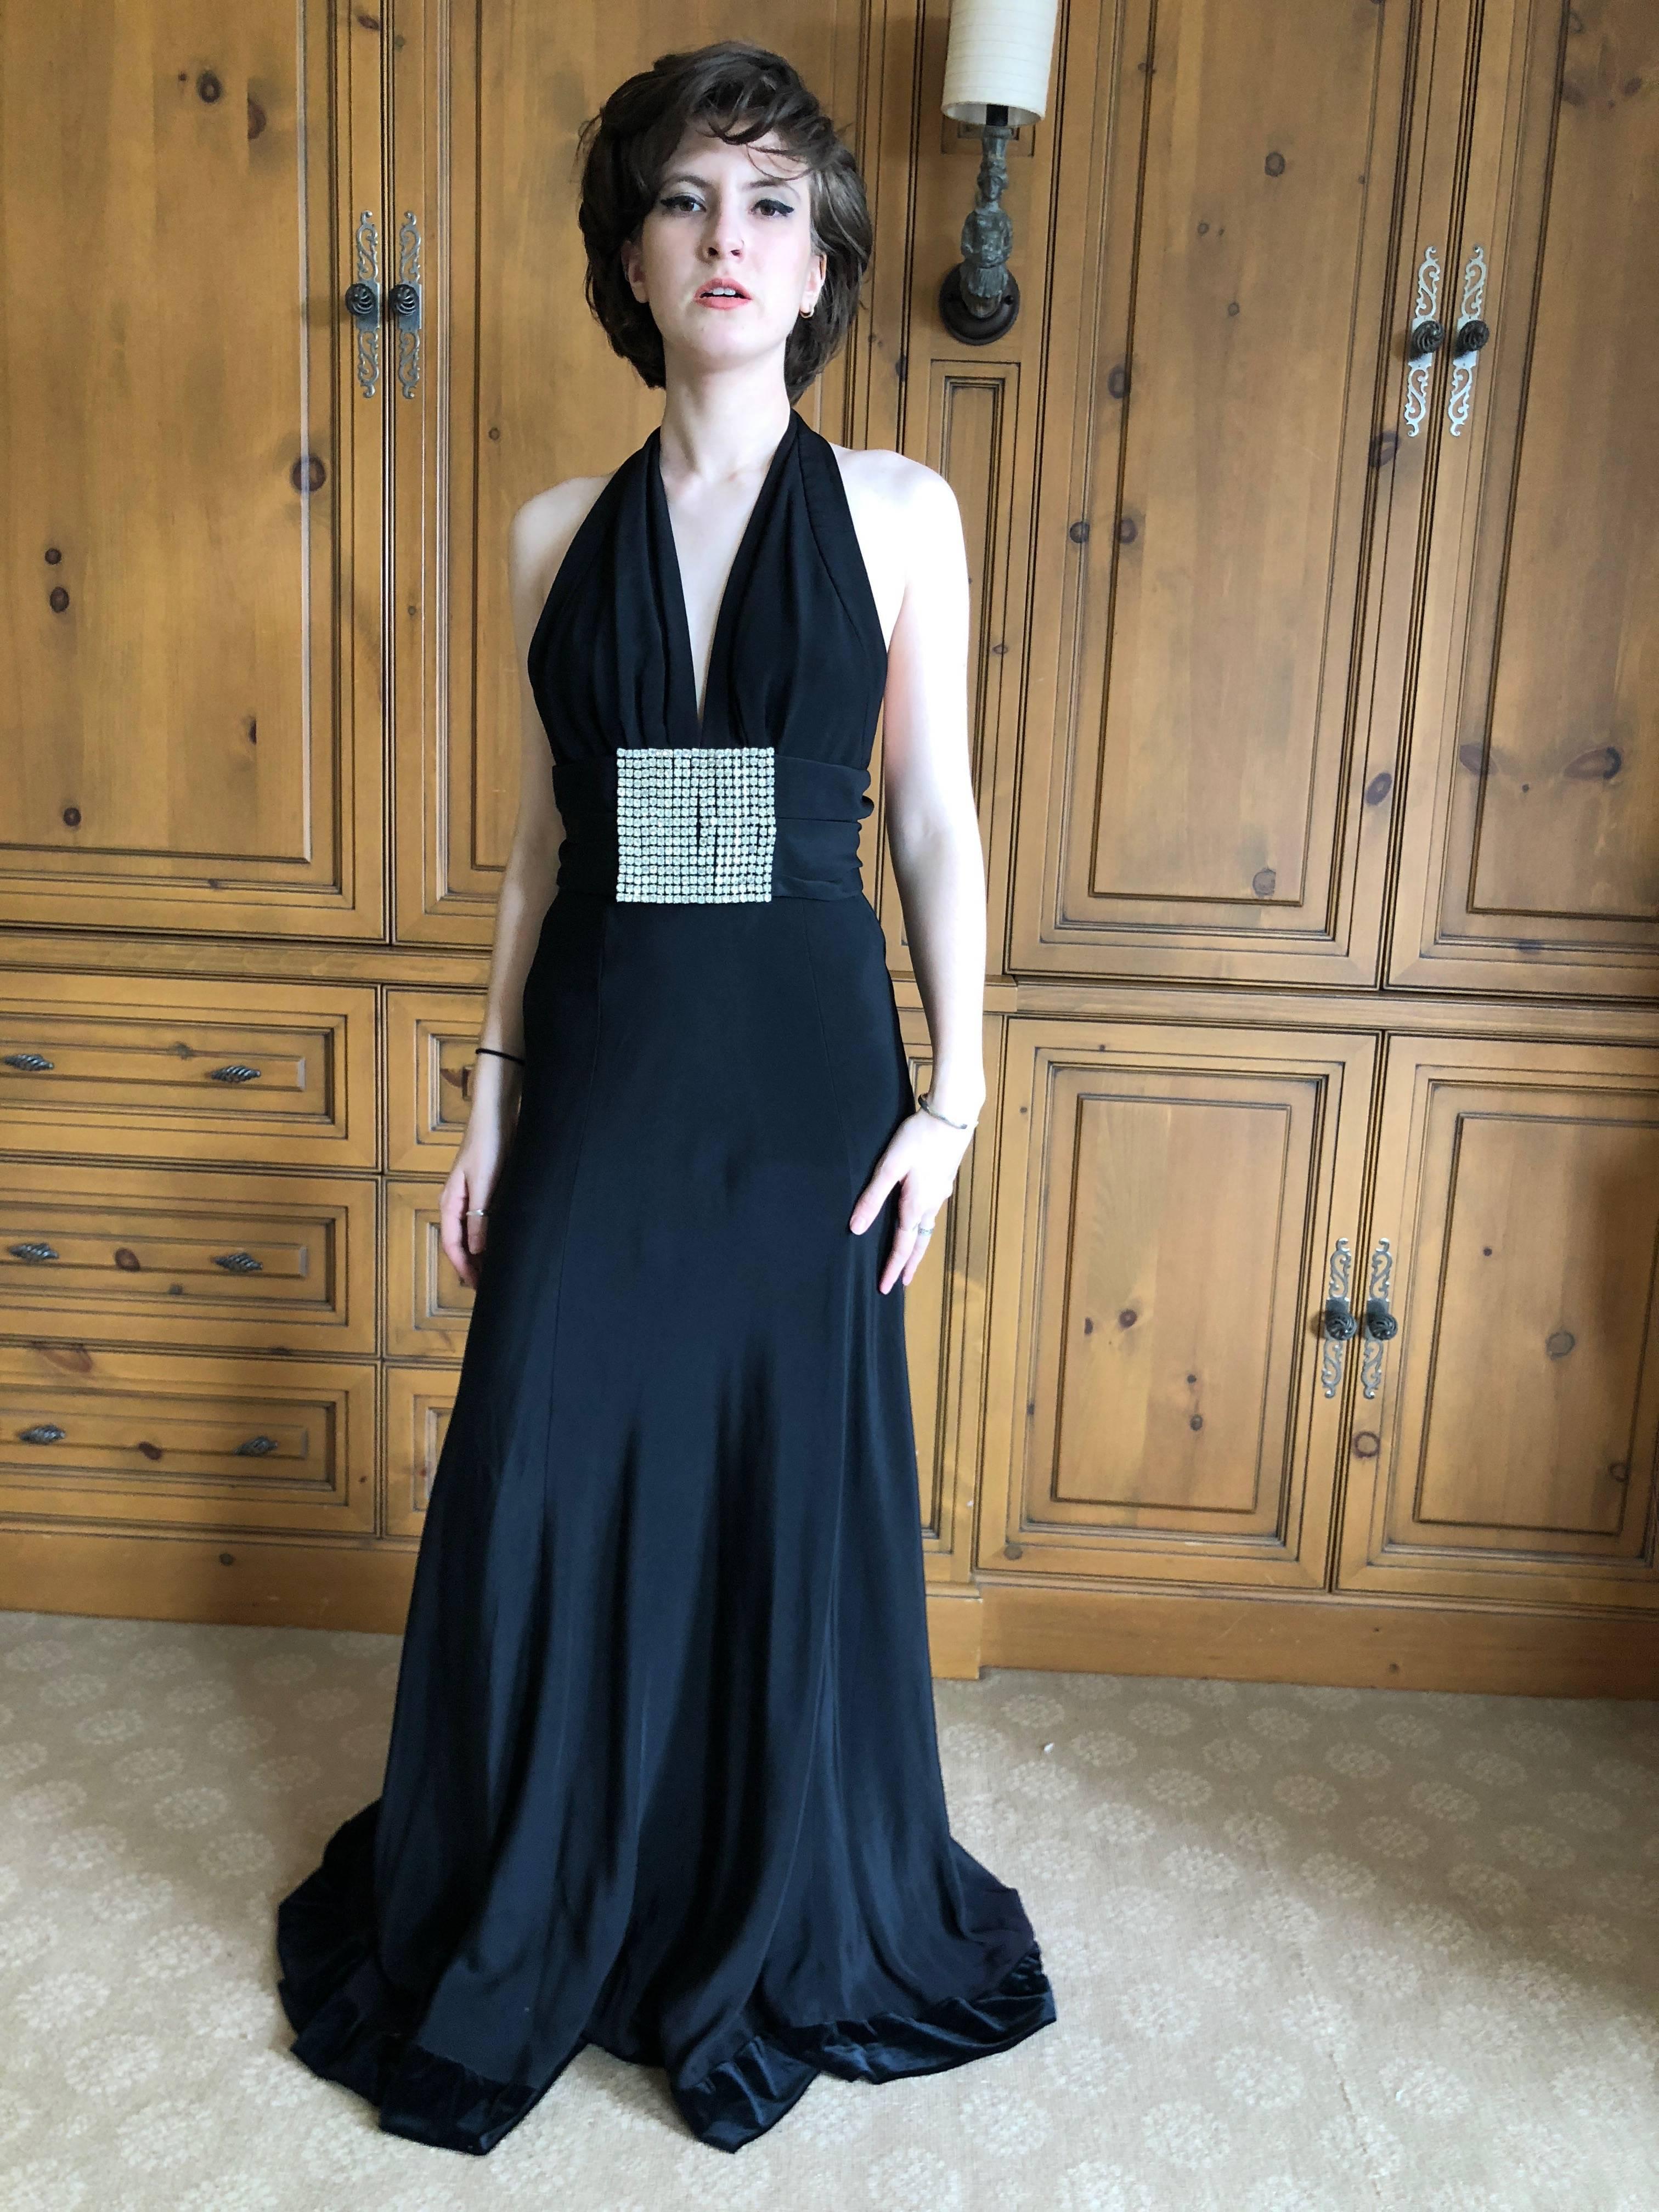 Cardinali Black Low Cut Halter Evening Dress with Huge Rhinestone Crystal Belt In Excellent Condition For Sale In Cloverdale, CA